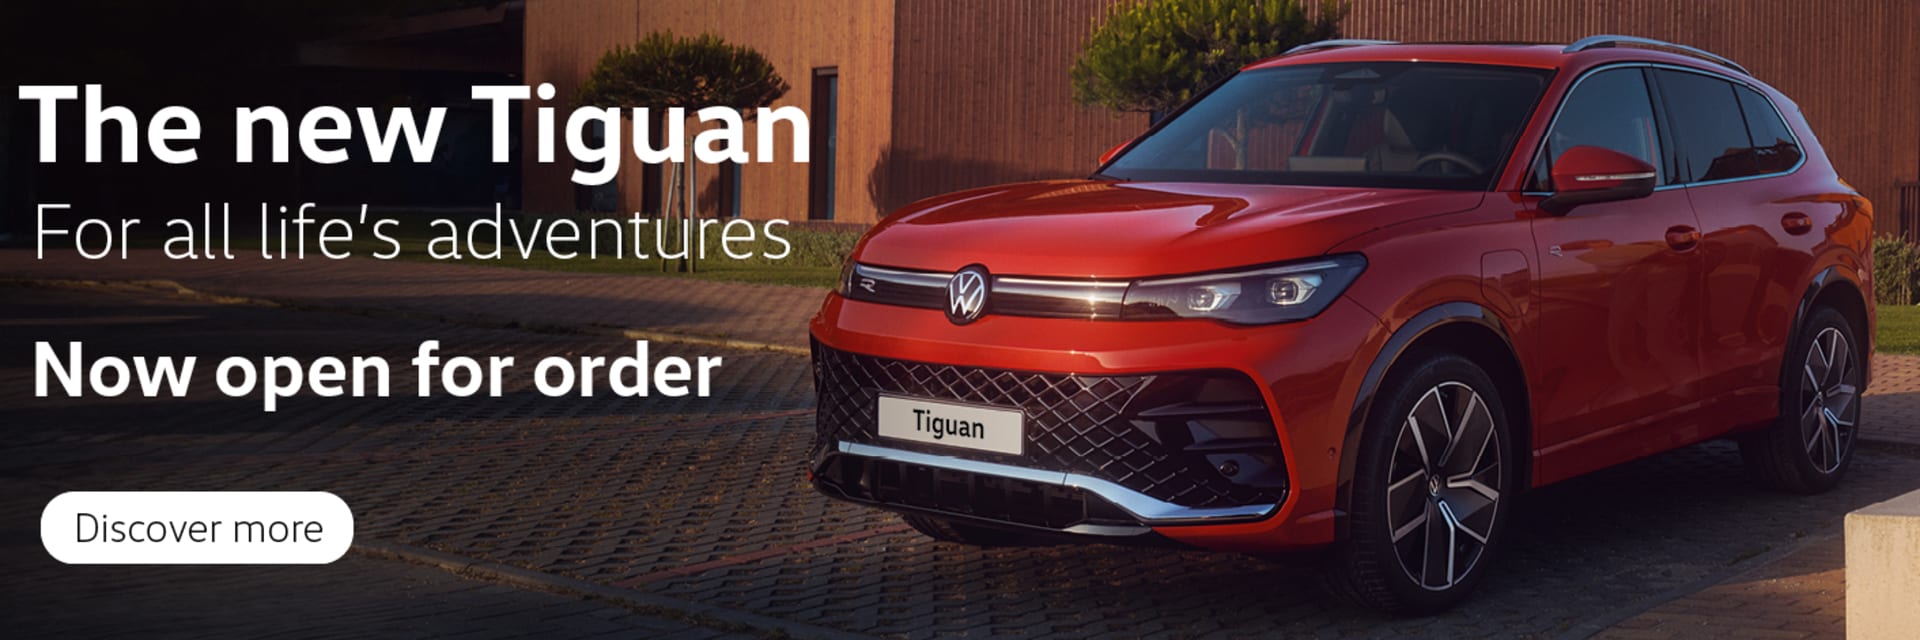 The New Tiguan is Ready